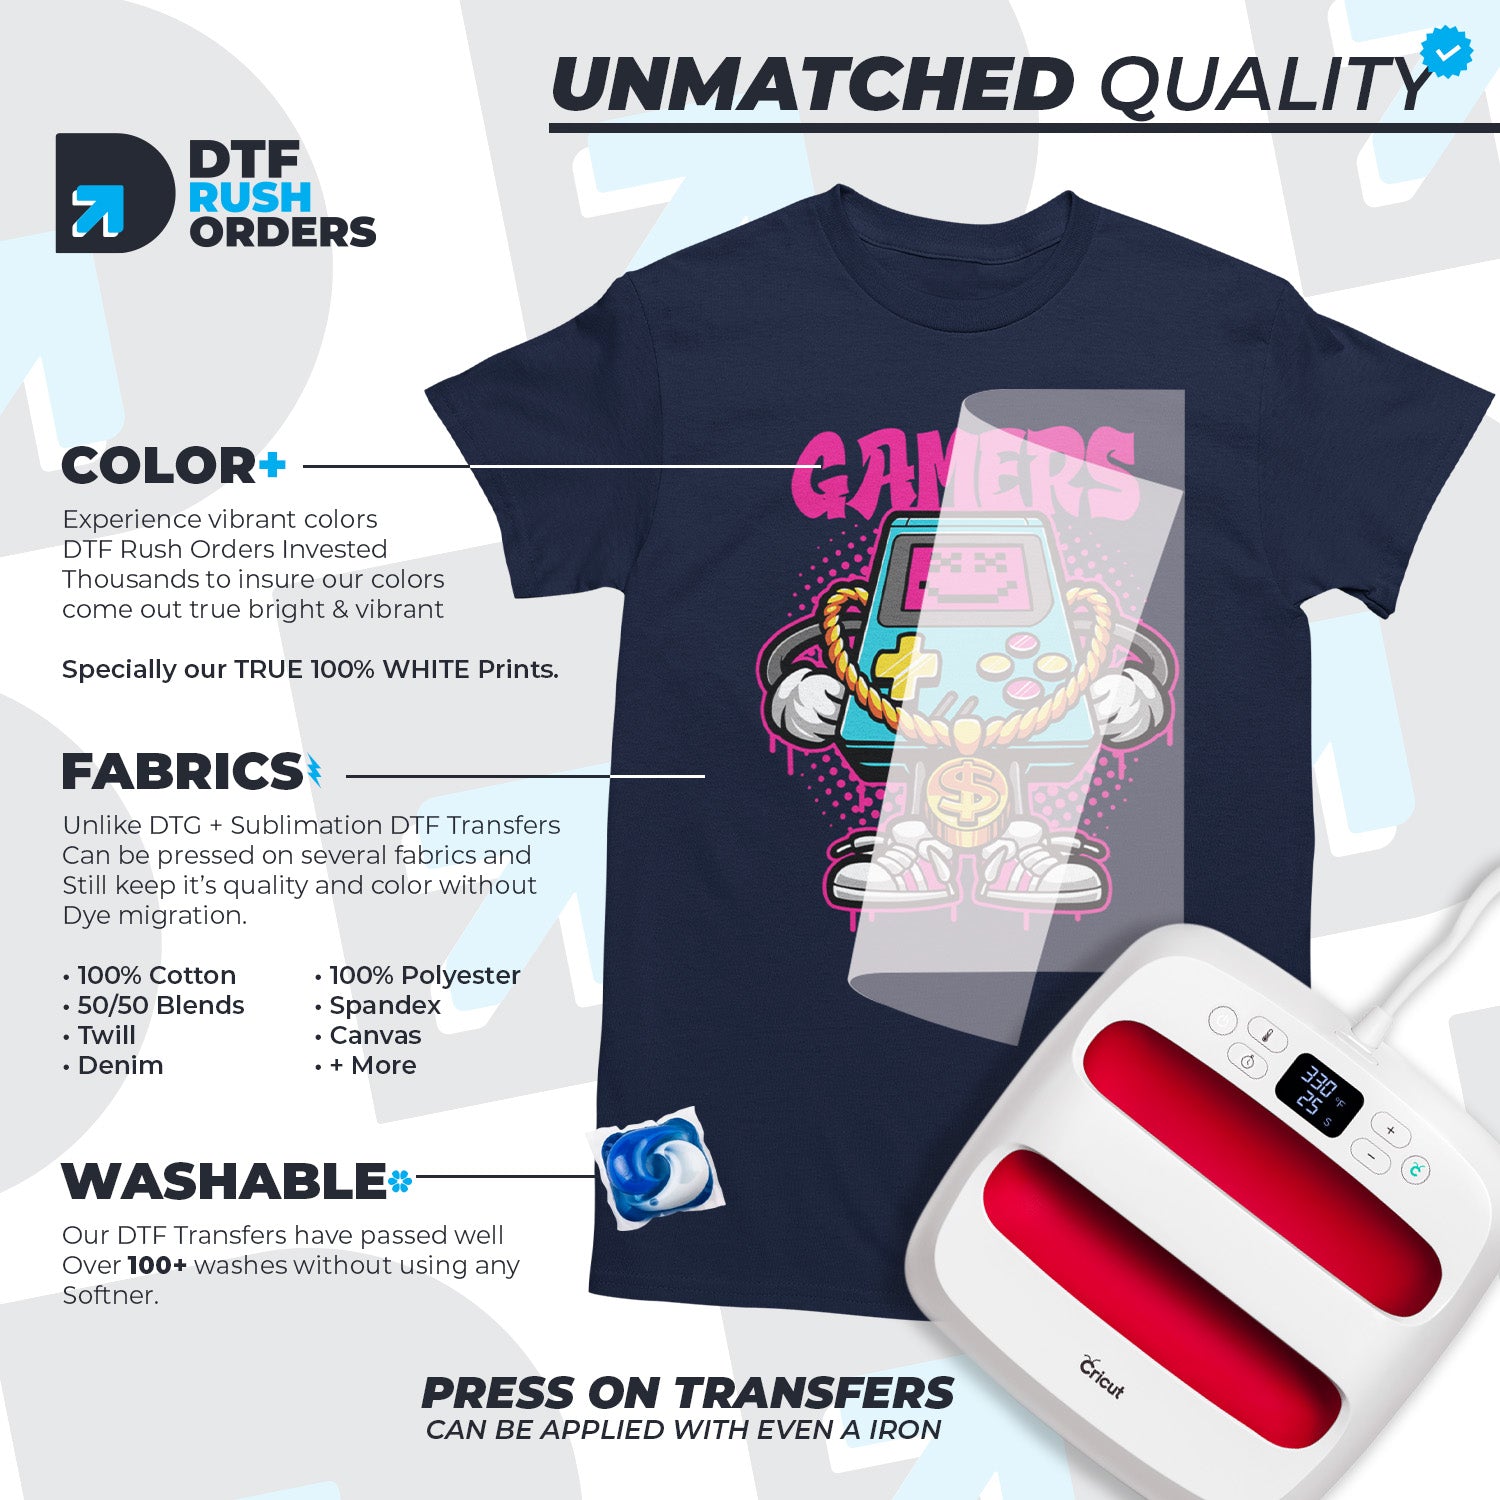 Premium Quality DTF Transfers Printed by DTF Rush Orders